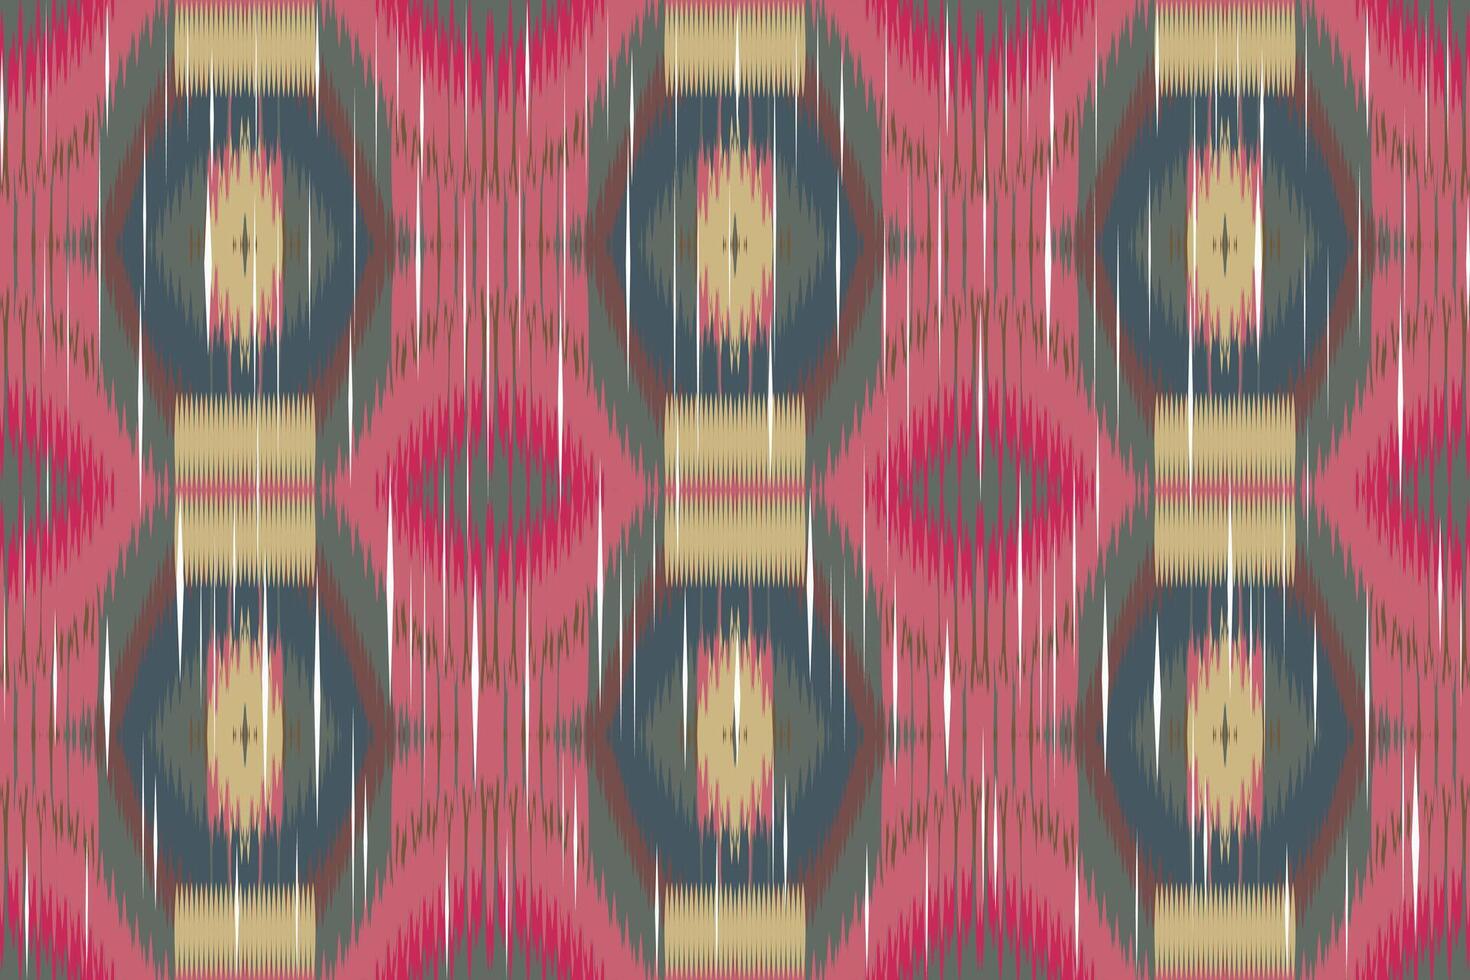 Ikat Paisley Embroidery on the Fabric in Indonesia,india and Asian countries.geometric Ethnic Oriental Seamless pattern.aztec Style. illustration.design for Texture,fabric,clothing,wrapping,carpet. vector